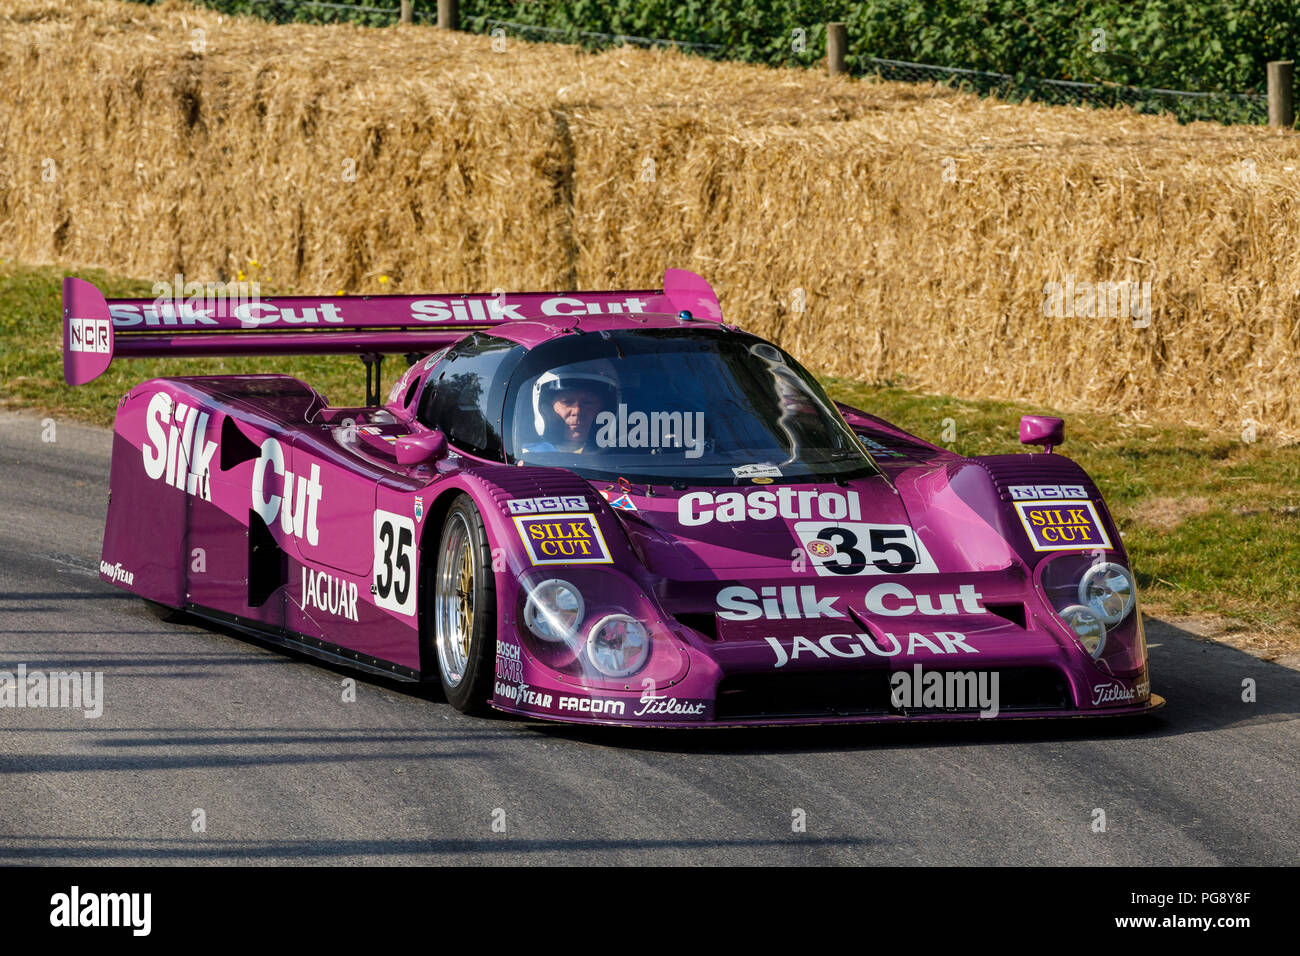 1988 Silk Cut Jaguar XJR-9 LM Le Mans endurance racer with driver Gary Pearson at the 2018 Goodwood Festival of Speed, Sussex, UK. Stock Photo